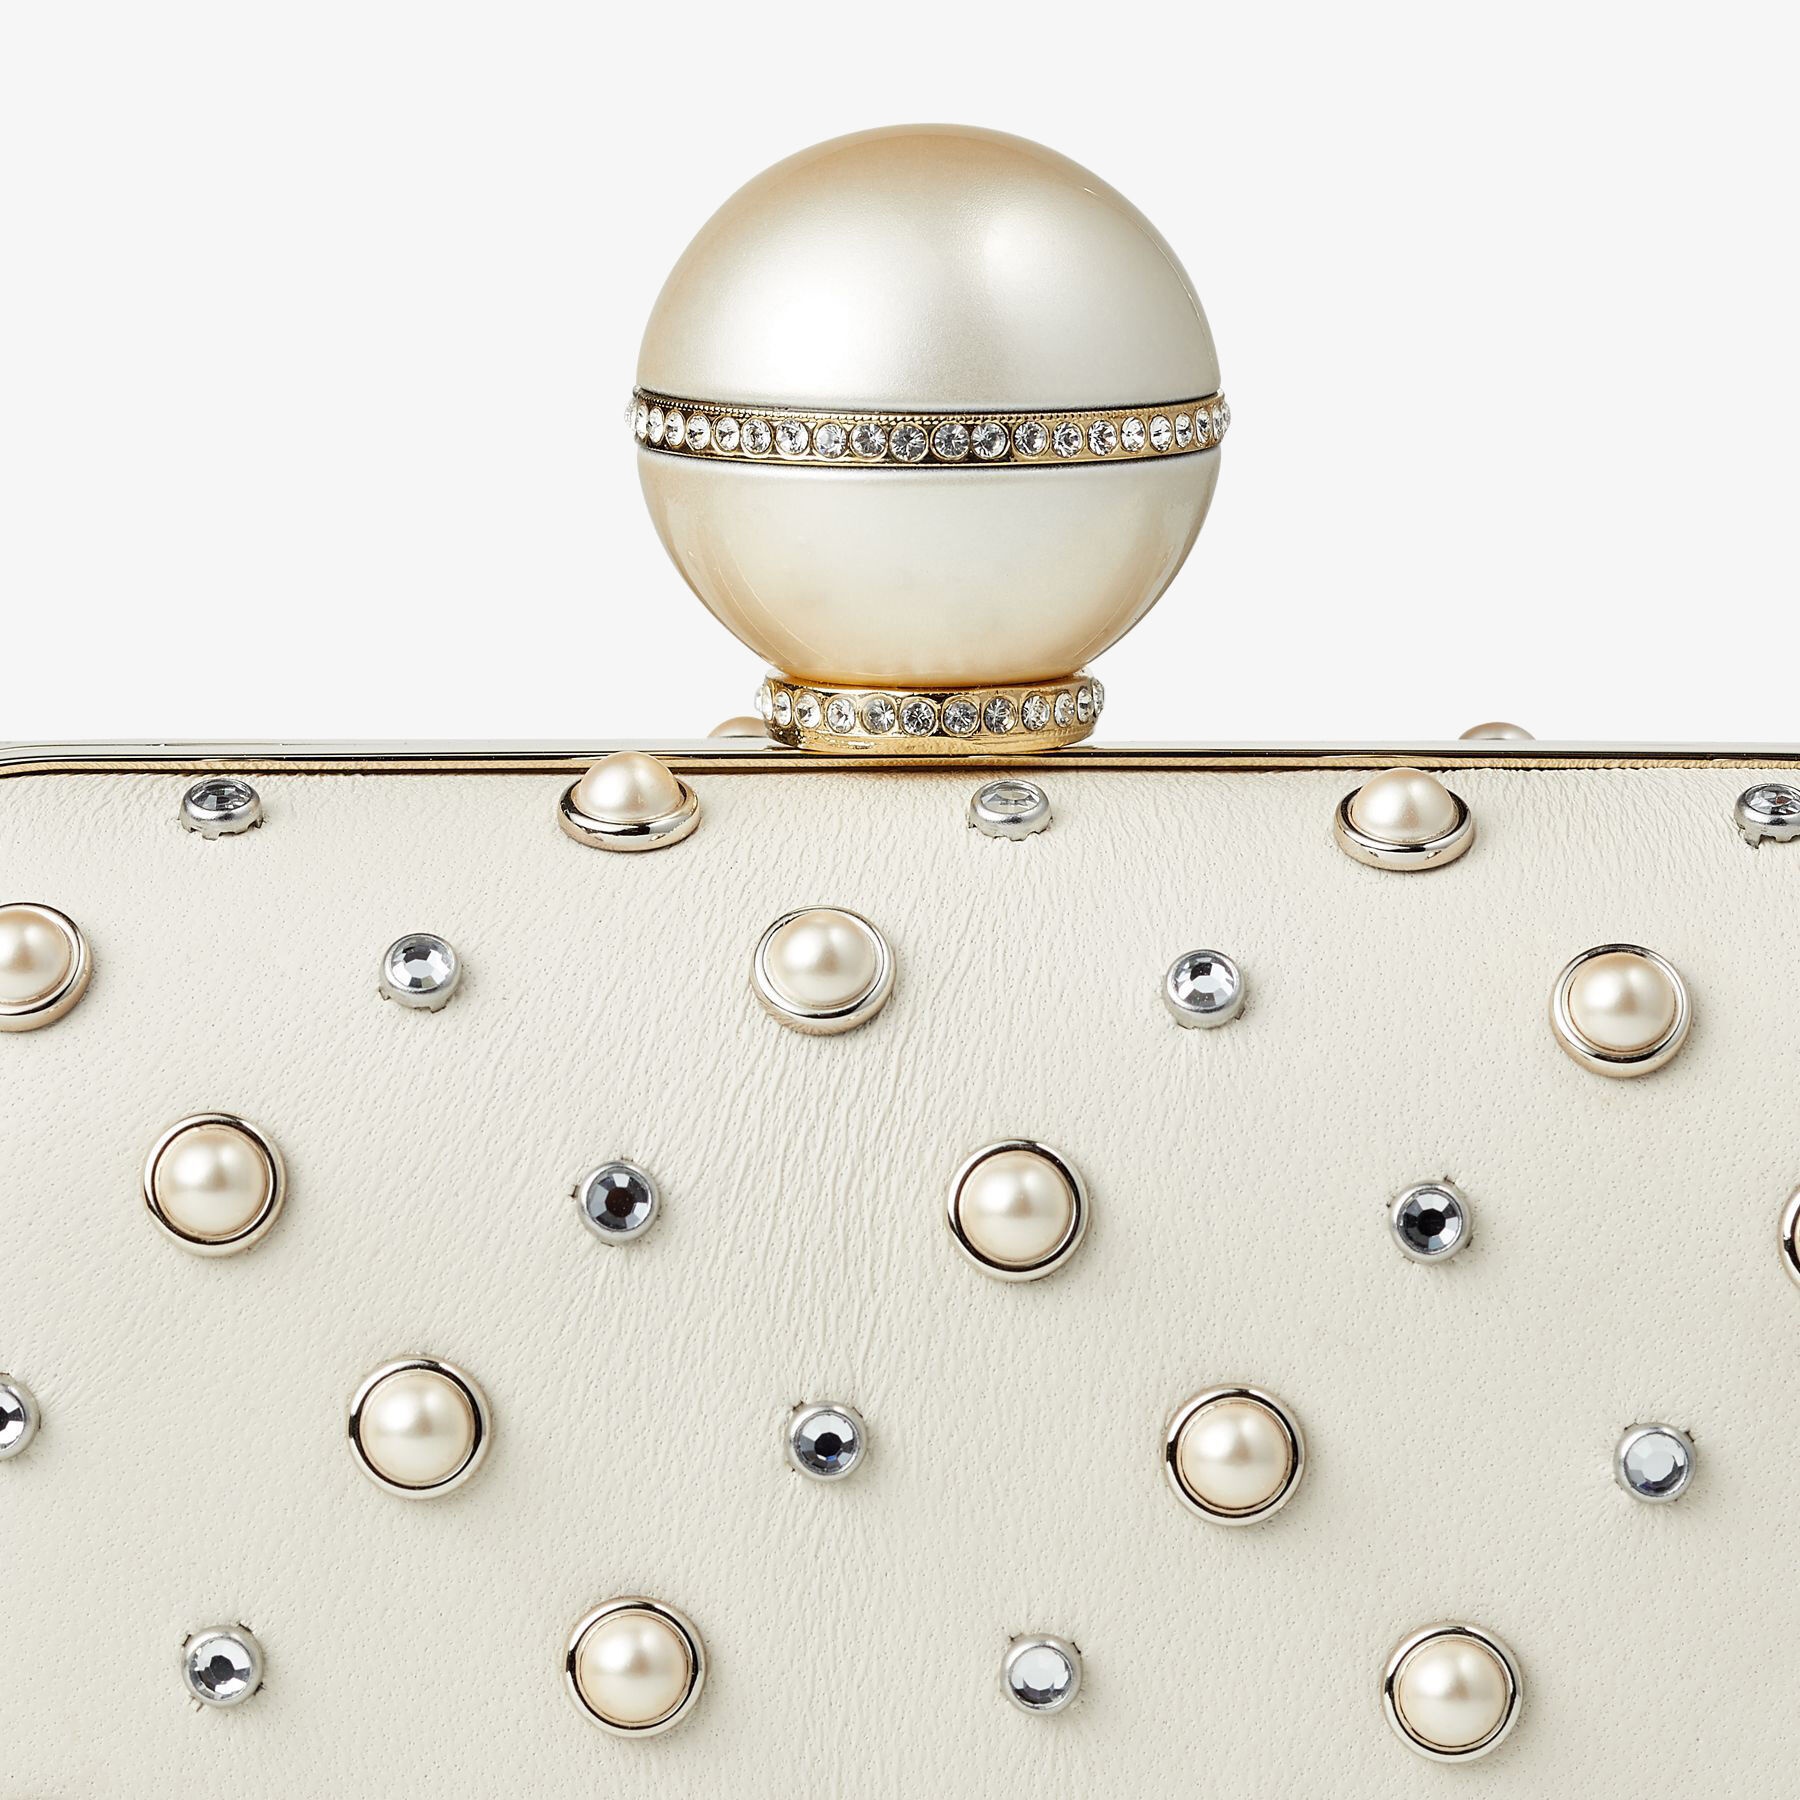 Cloud
Pearl Mix Clutch Bag with Ball Clasp - 5